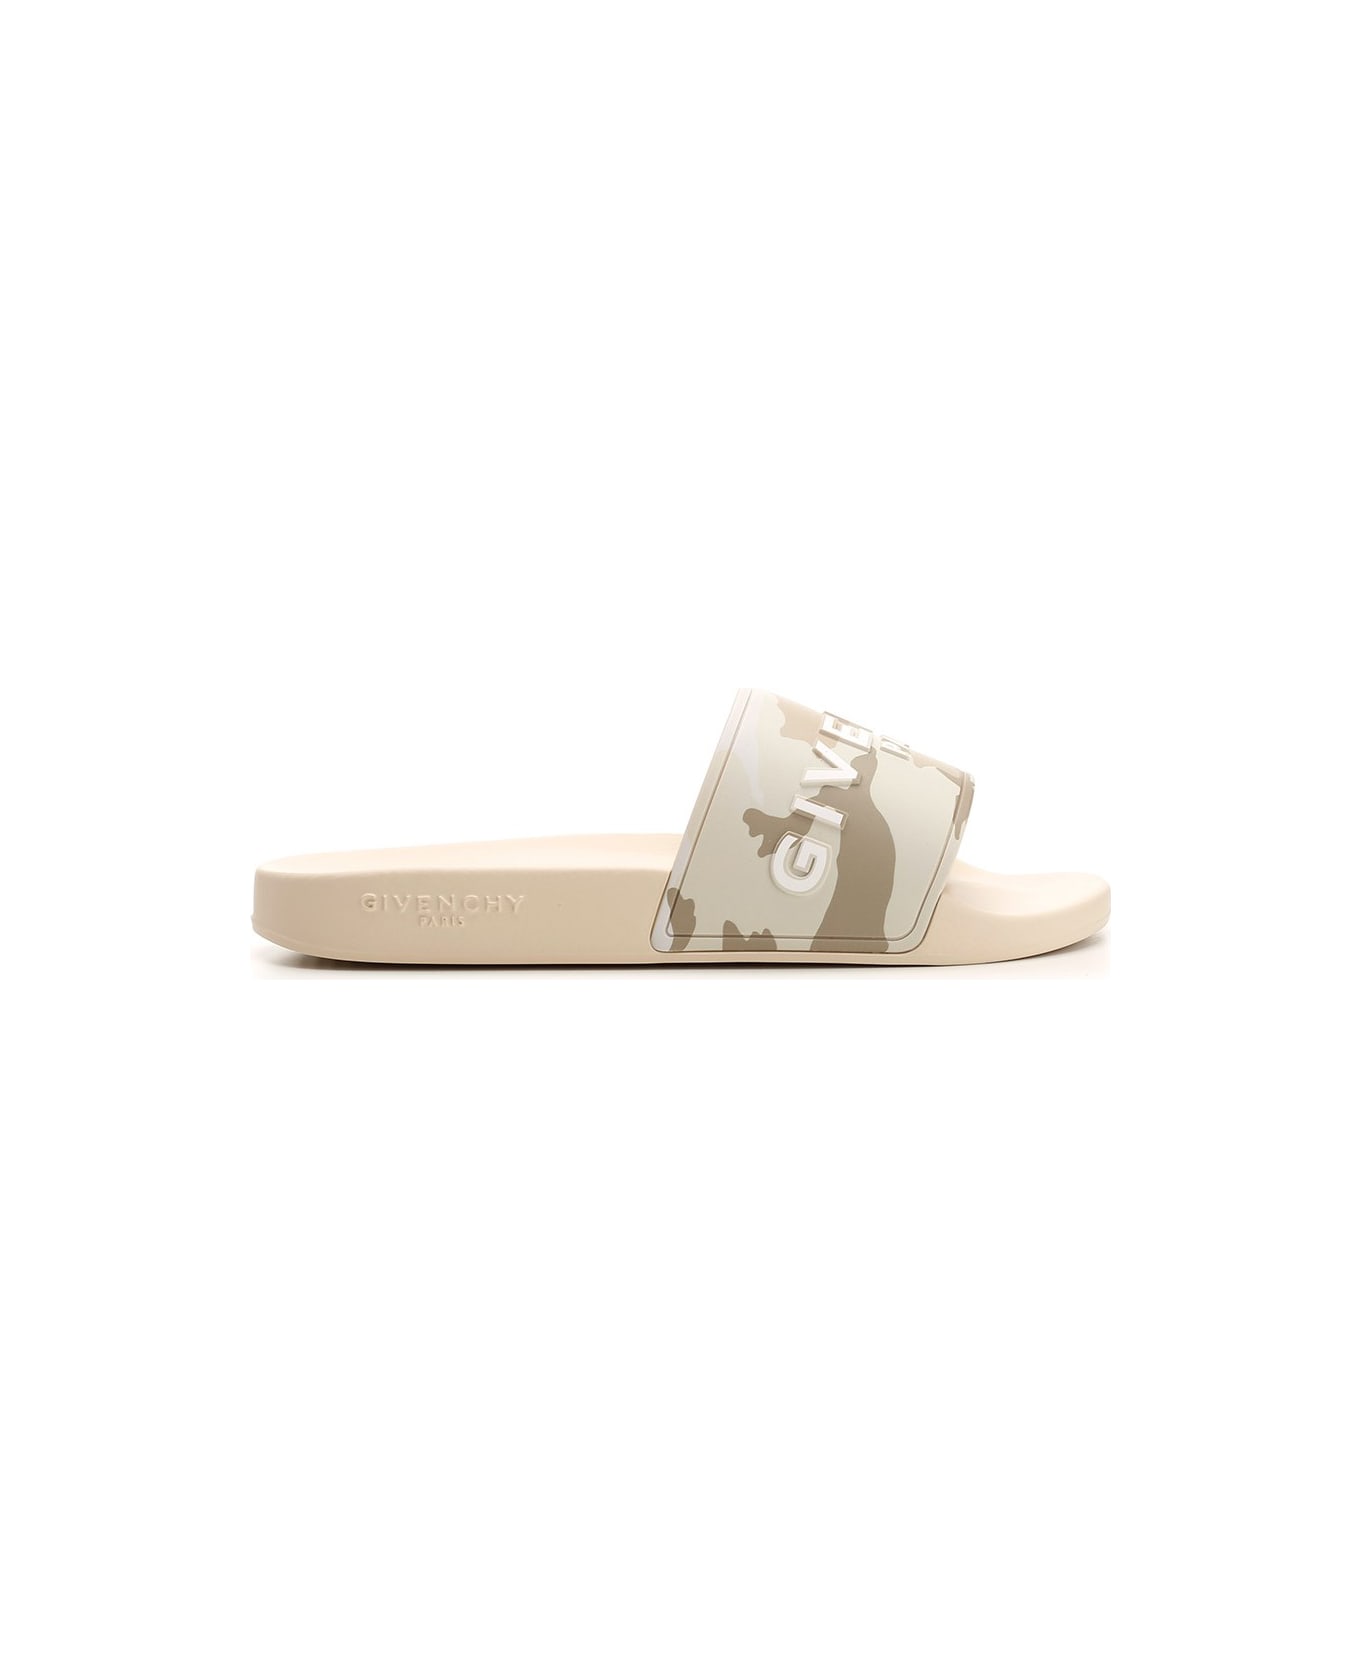 Givenchy Man Light Beige Rubber Slipper With Camouflage Print - Light beige